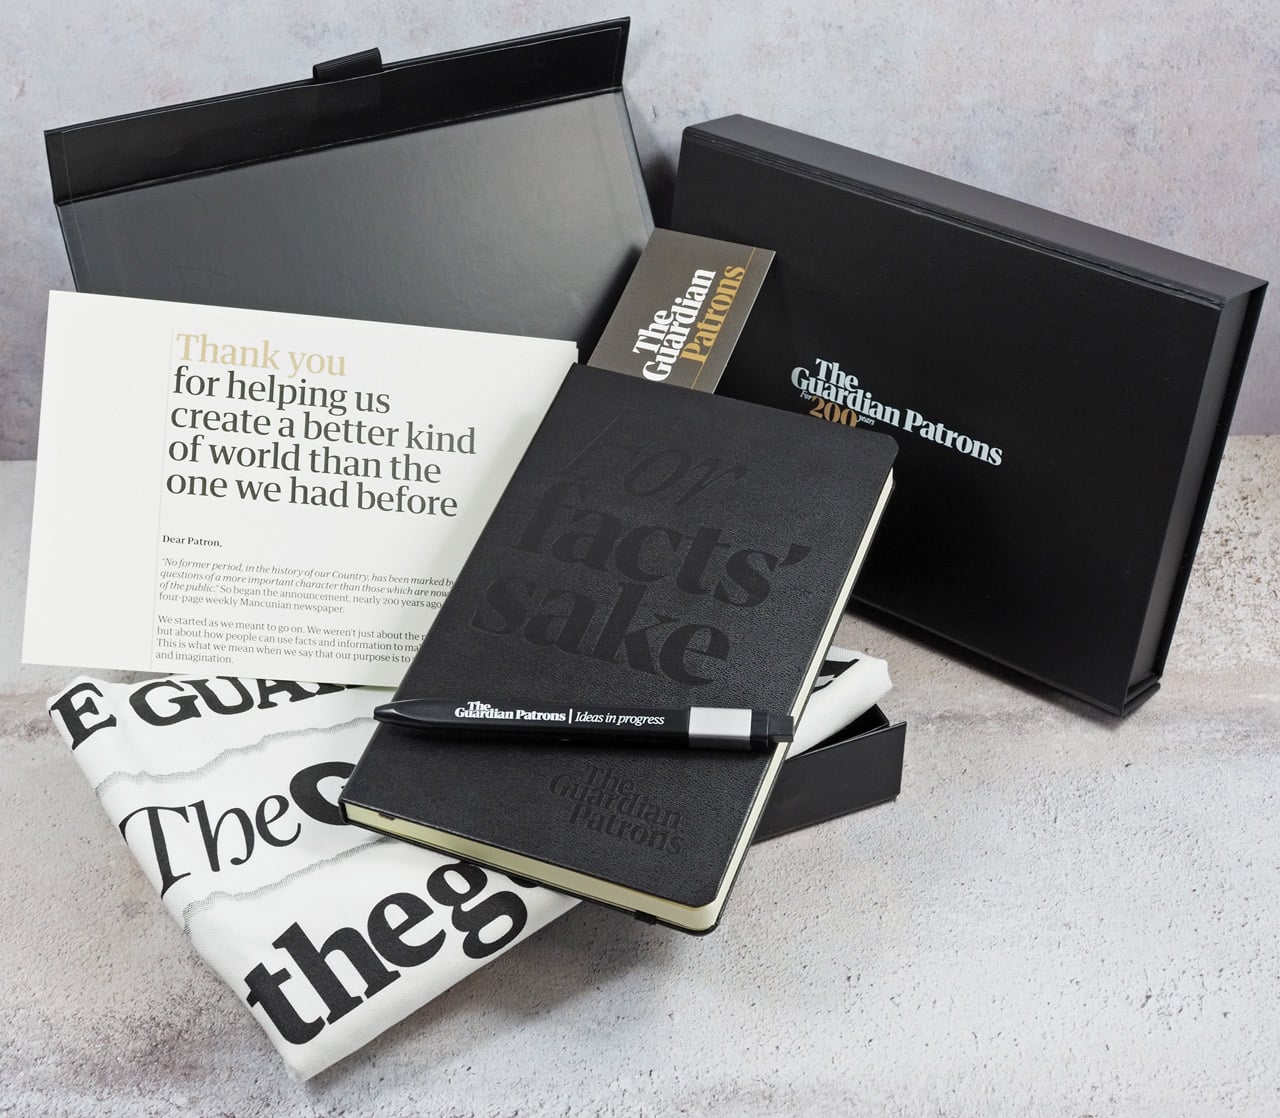 A debossed Moleskine, branded Moleskine pen, thank you letter, bookmark, and towel are seen as part of the patron gift sets.